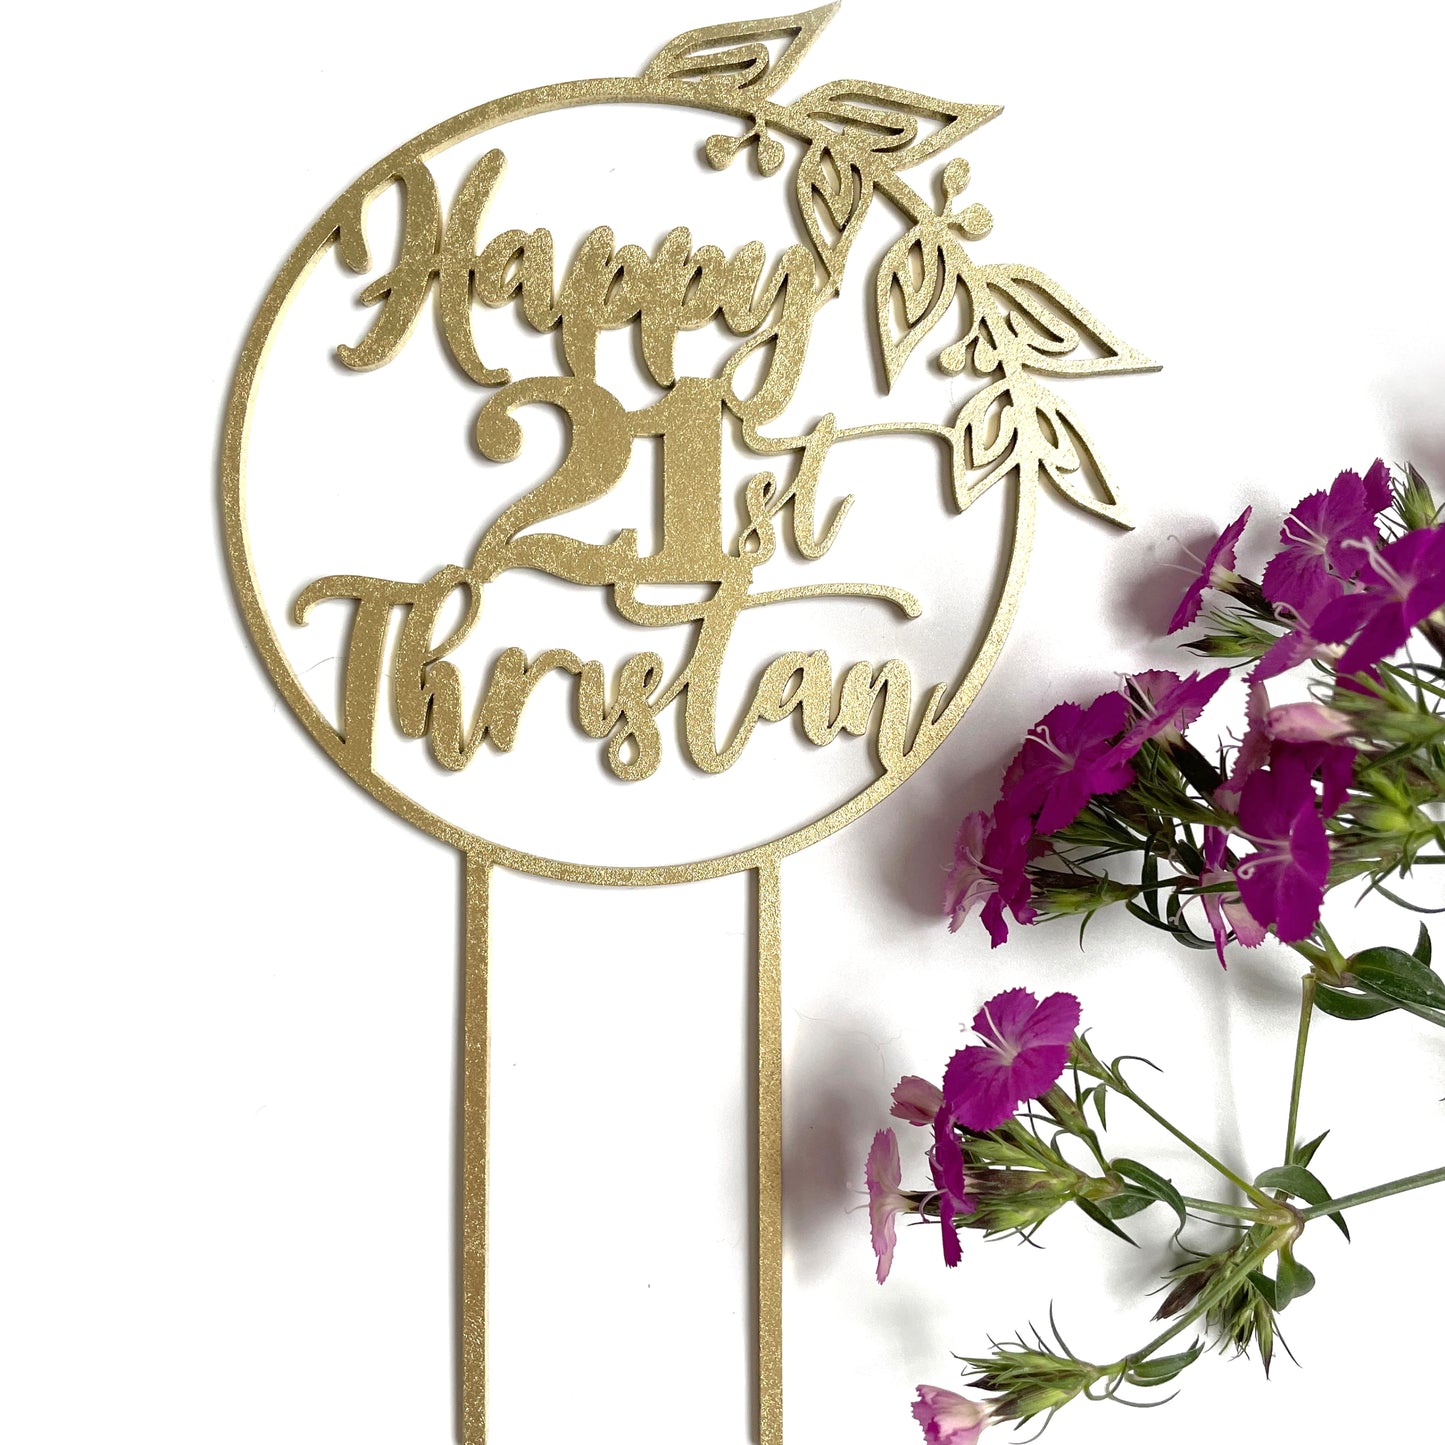 Personalised "Happy Birthday" cake topper with wreath design